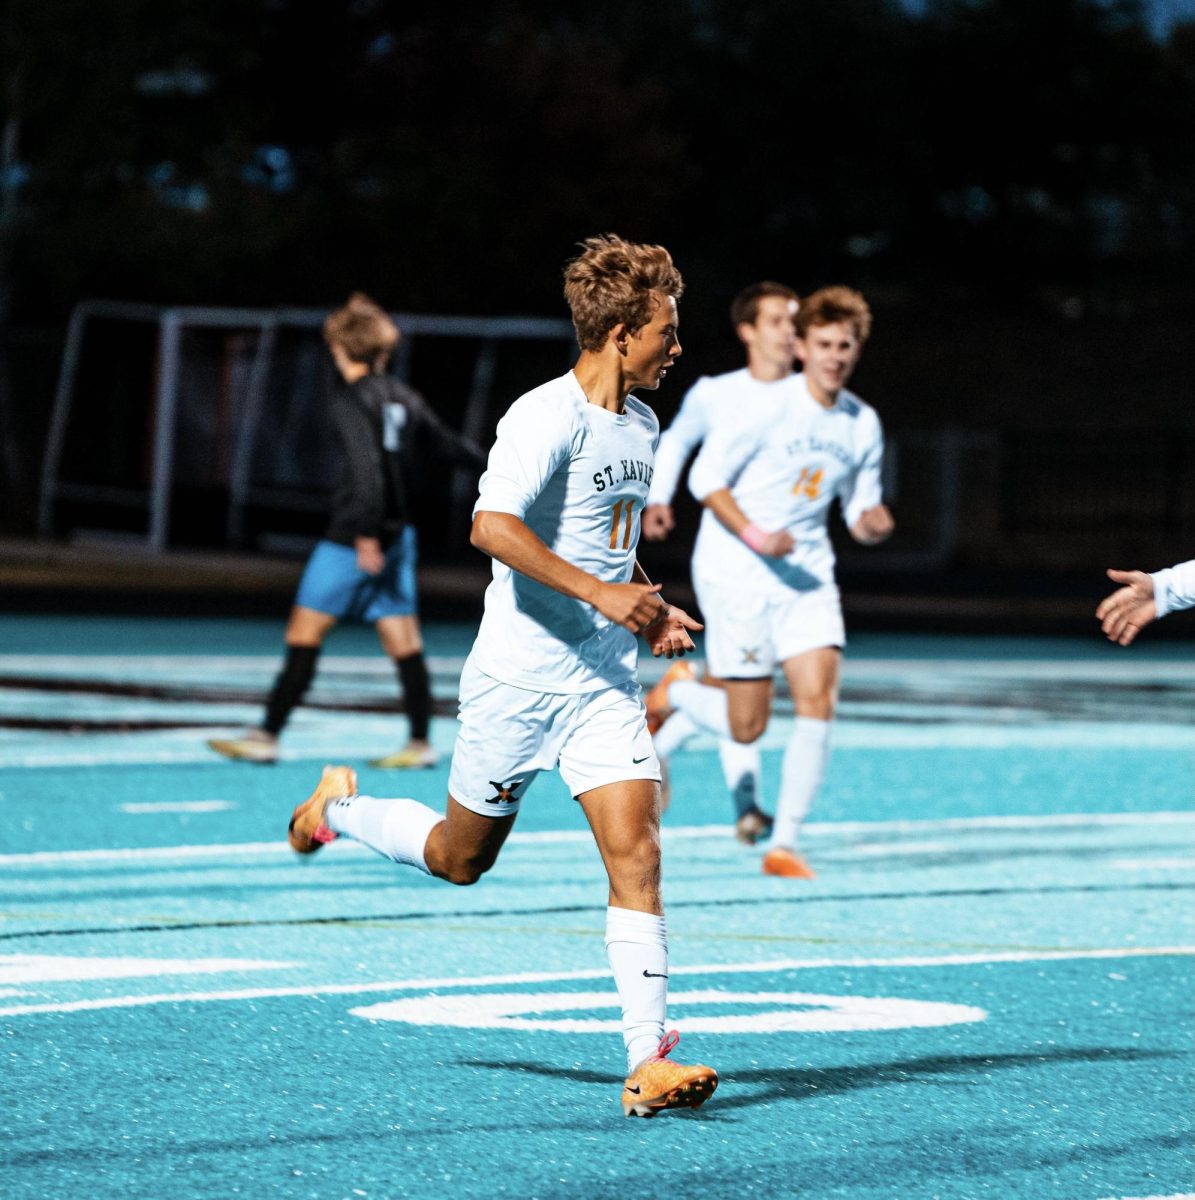 Trip Campbell after scoring one of his goals against North Oldham 